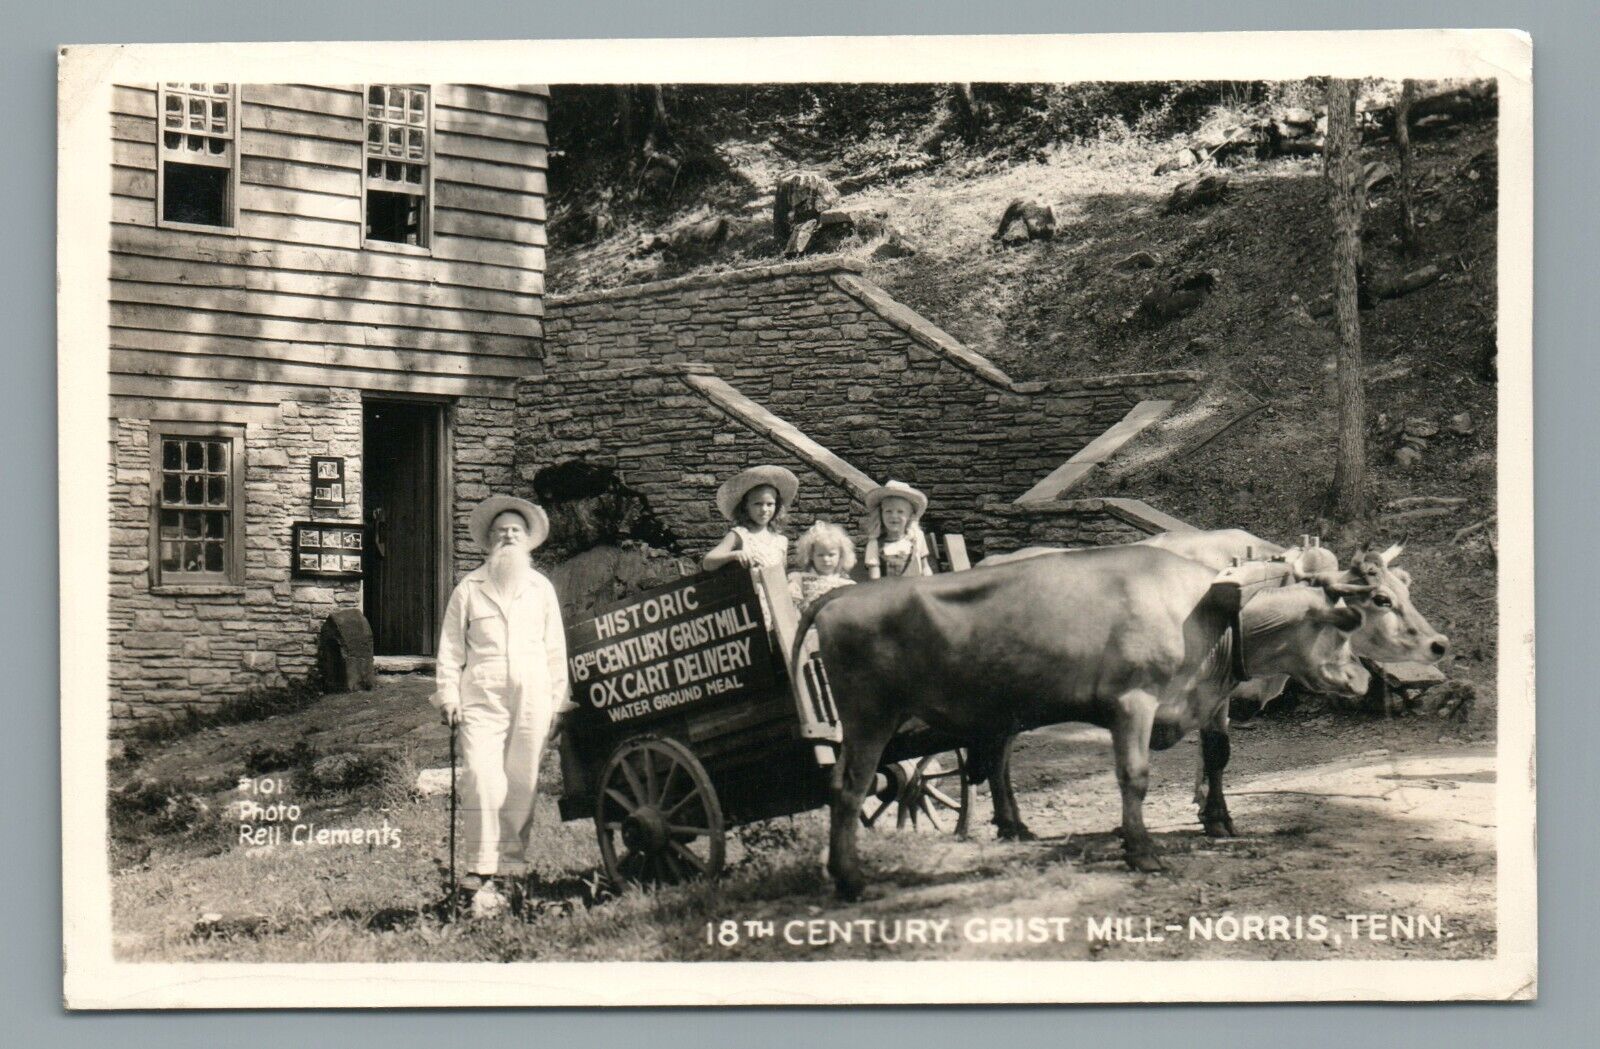 18 Th Century Grist Mill-Norris Tenn. & Ox Cart by Rell Clements RPPC Postcard